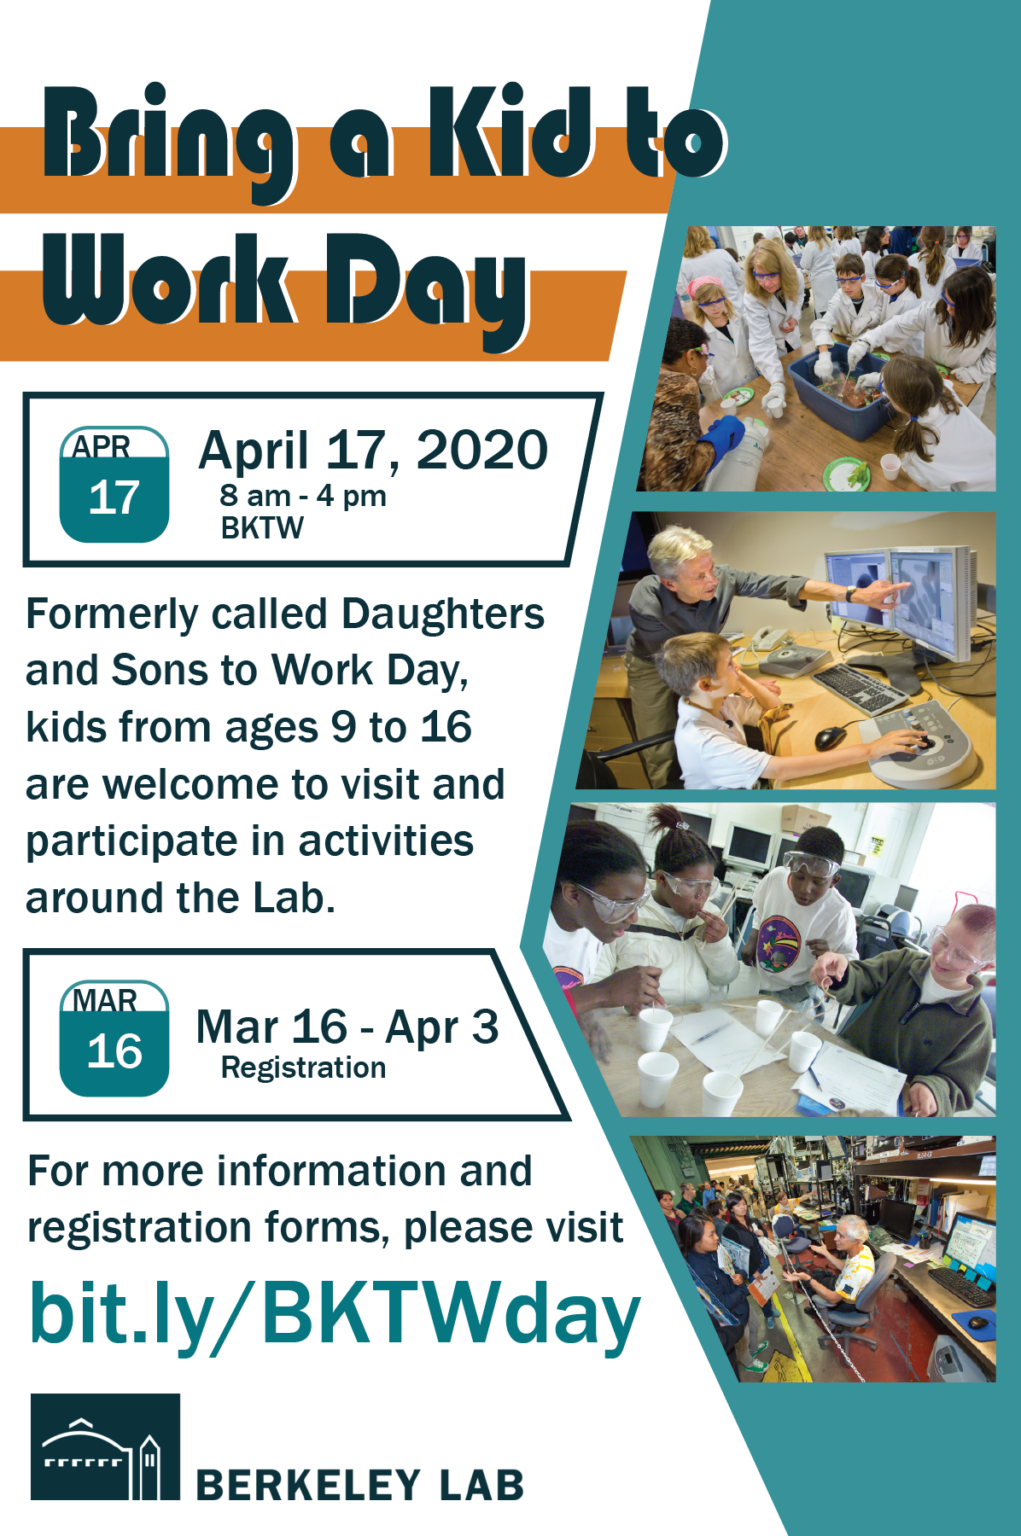 bring-a-kid-to-work-day-april-17-2020